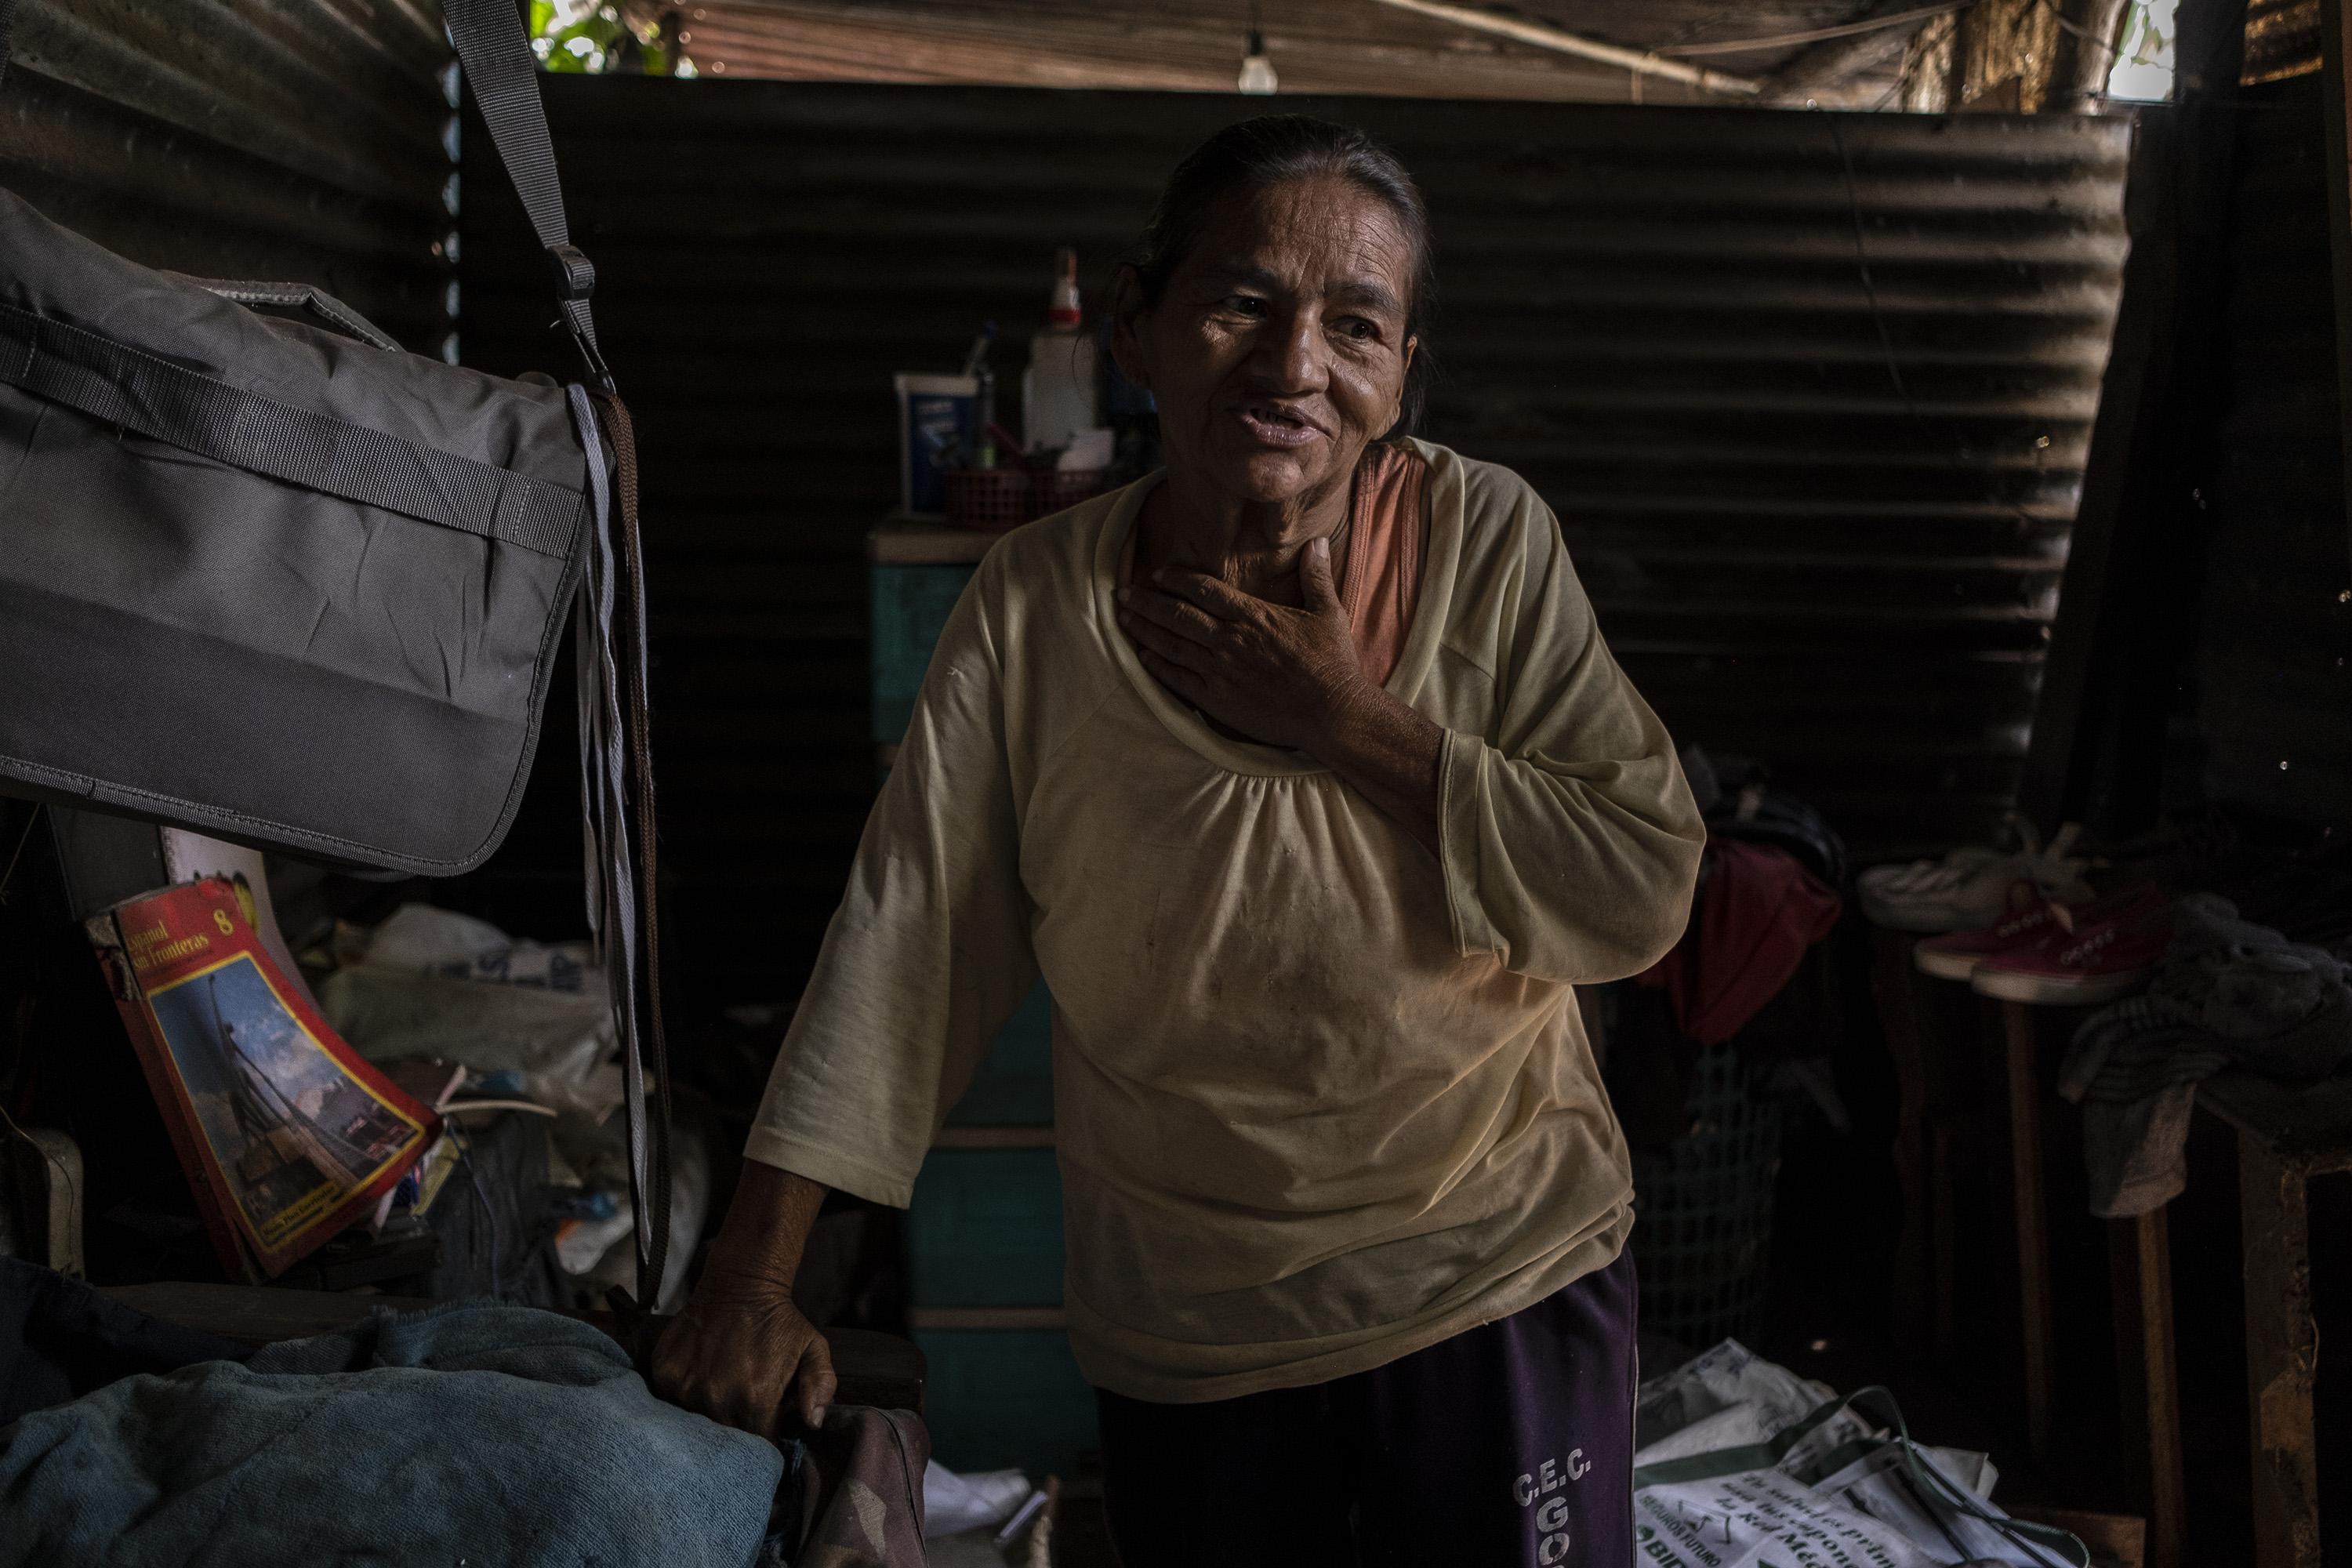 Gloria Marina Flores López, 64, lives in a home of sheet metal and wood in Cantarrana, Santa Ana. She is the mother of Marvin Alexander Flores, 29, who graduated from the Central American University’s Political Training School in 2019 and is seeking a degree in social work from the Lutheran University. Marvin, the sole provider in the household, supported his family thanks to a scholarship and his work as an event photographer. On April 24, he was arrested in Colonia La Esmeralda, Santa Ana, while visiting his partner. He was handcuffed along with his brother-in-law and sent to Mariona Prison. Gloria is now alone, and an injured knee has prevented her from traveling. She is now getting by on the generosity of her neighbors. Photo: Carlos Barrera/El Faro